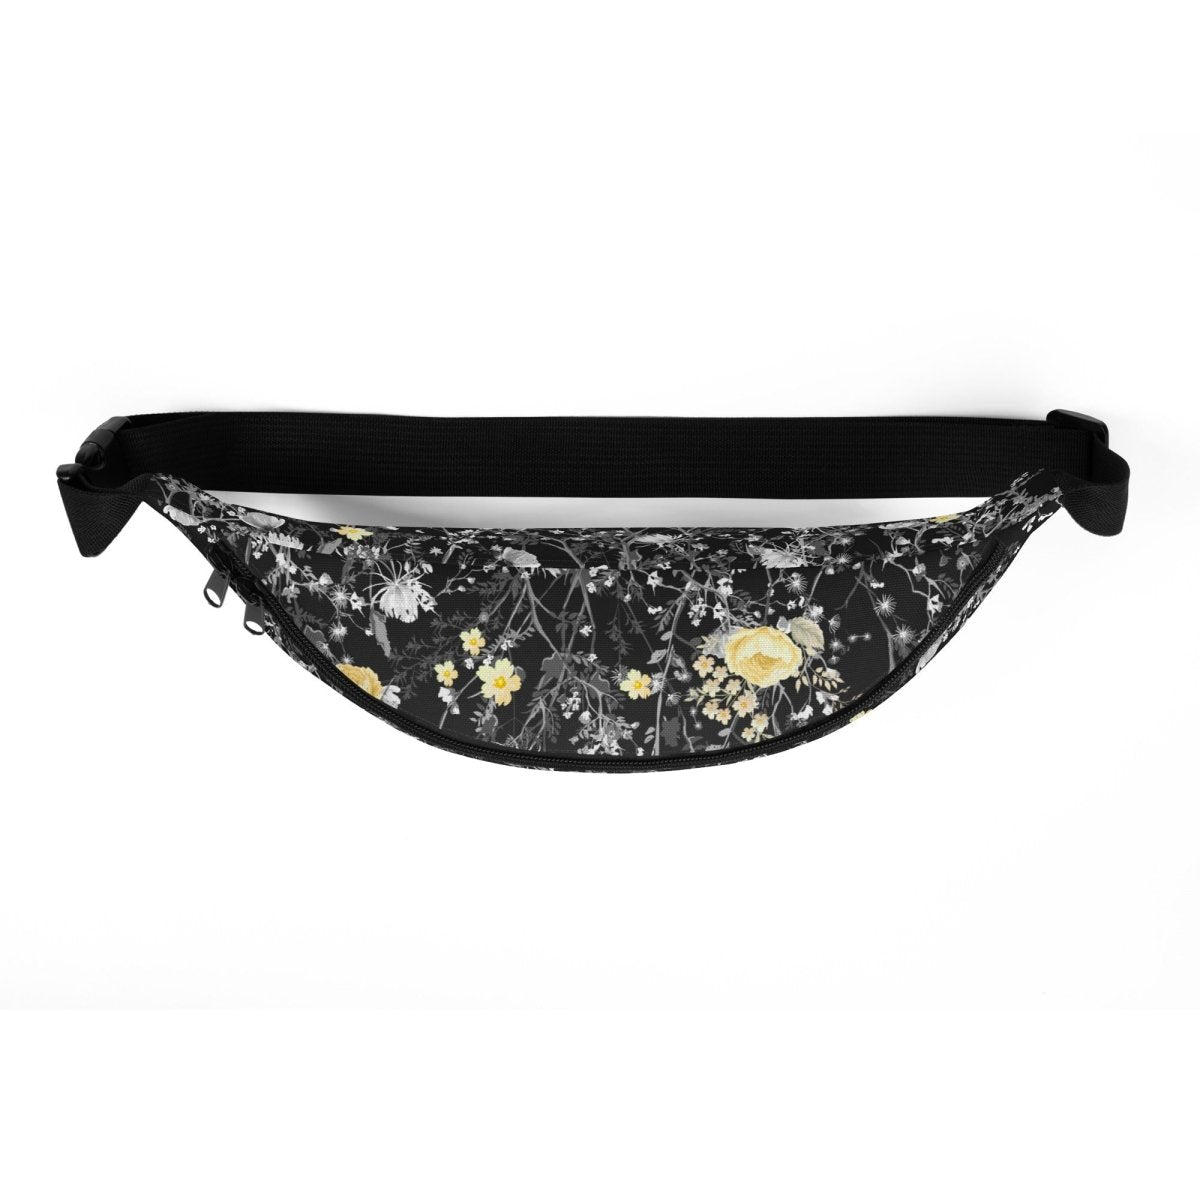 Grey Floral Fanny Pack - DoggyLoveandMore